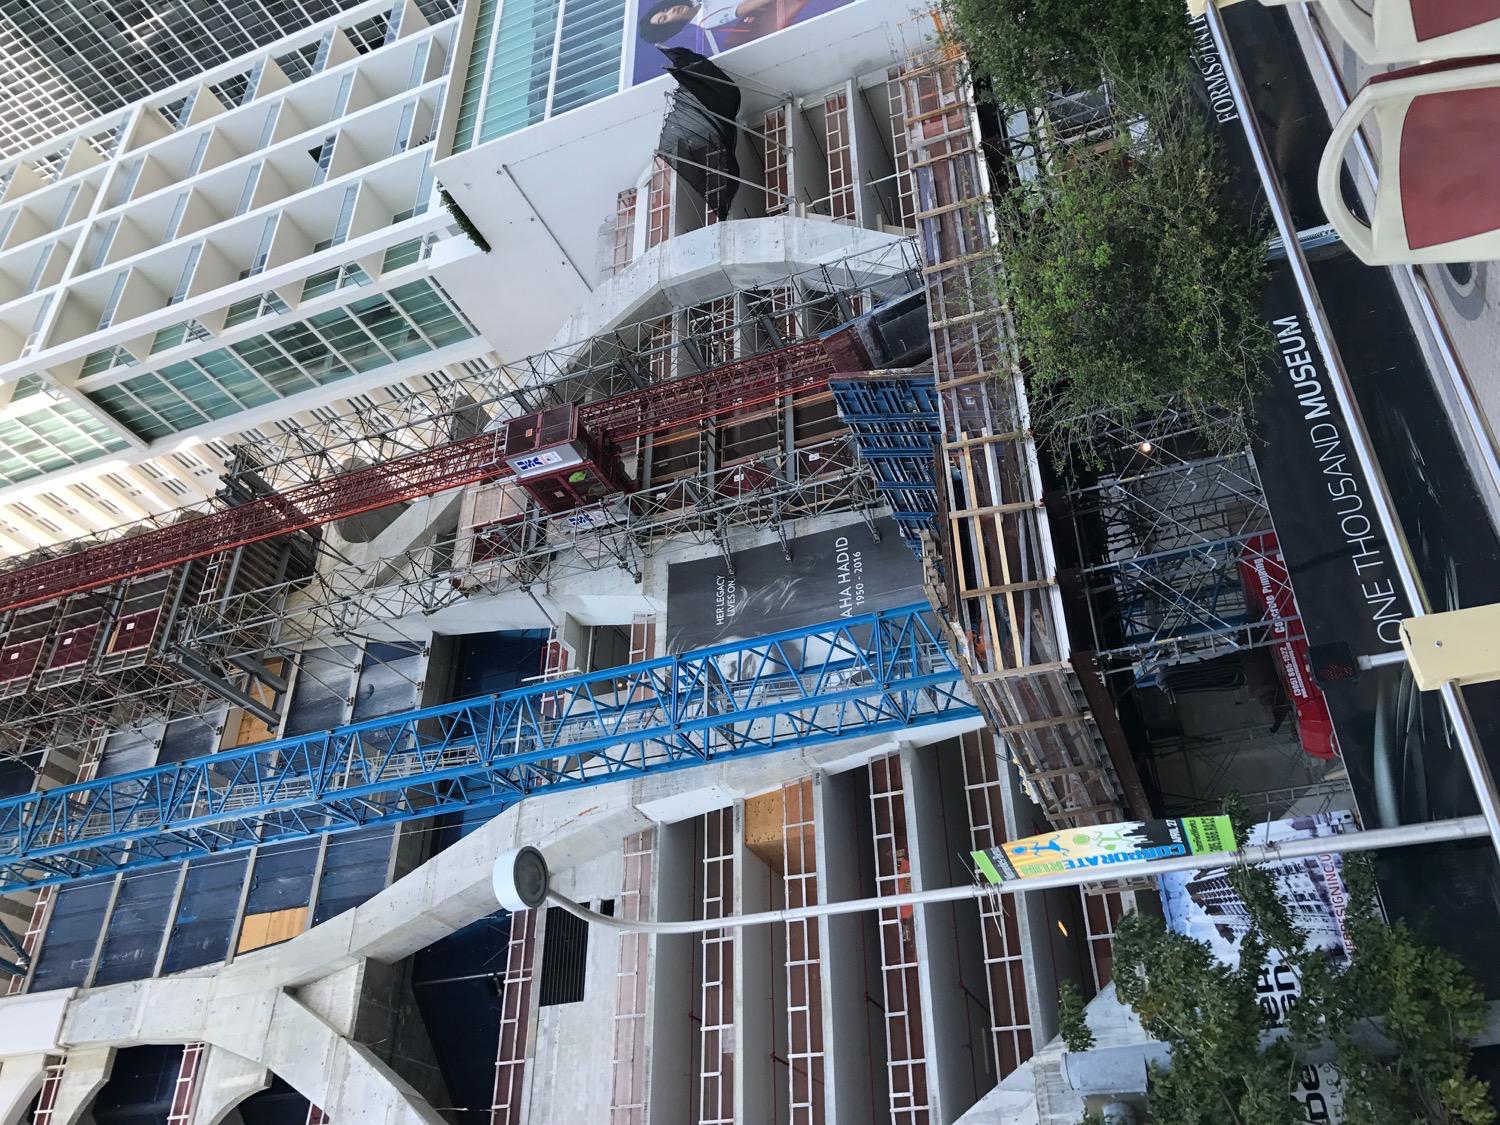 View of the facade under construction from Biscayne Blvd